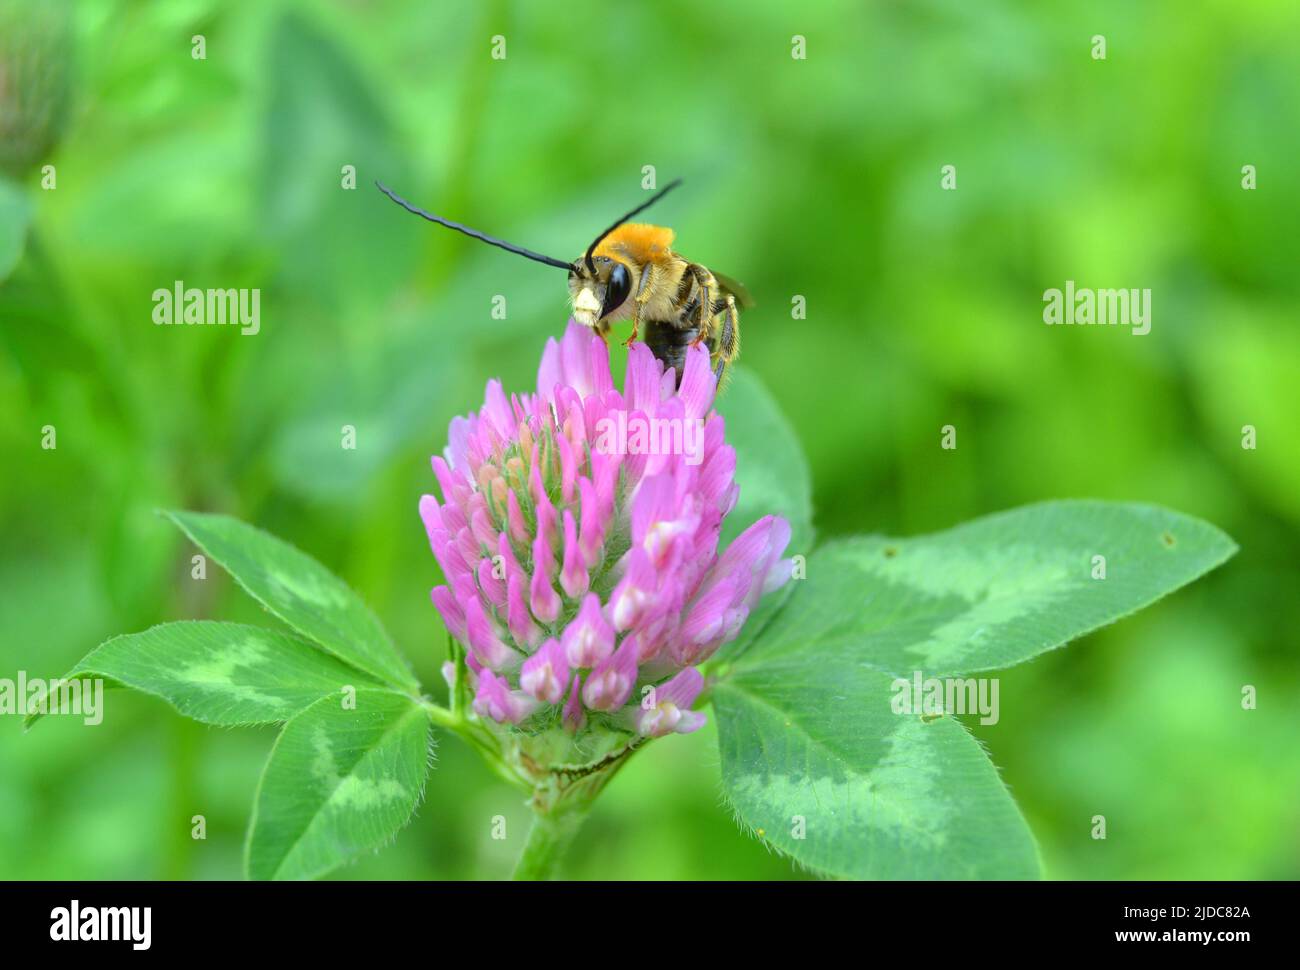 Eucera longicornis is a species of bee in the family Apidae, subfamily Apinae, and tribe Eucerini, the long-horned bees. Stock Photo